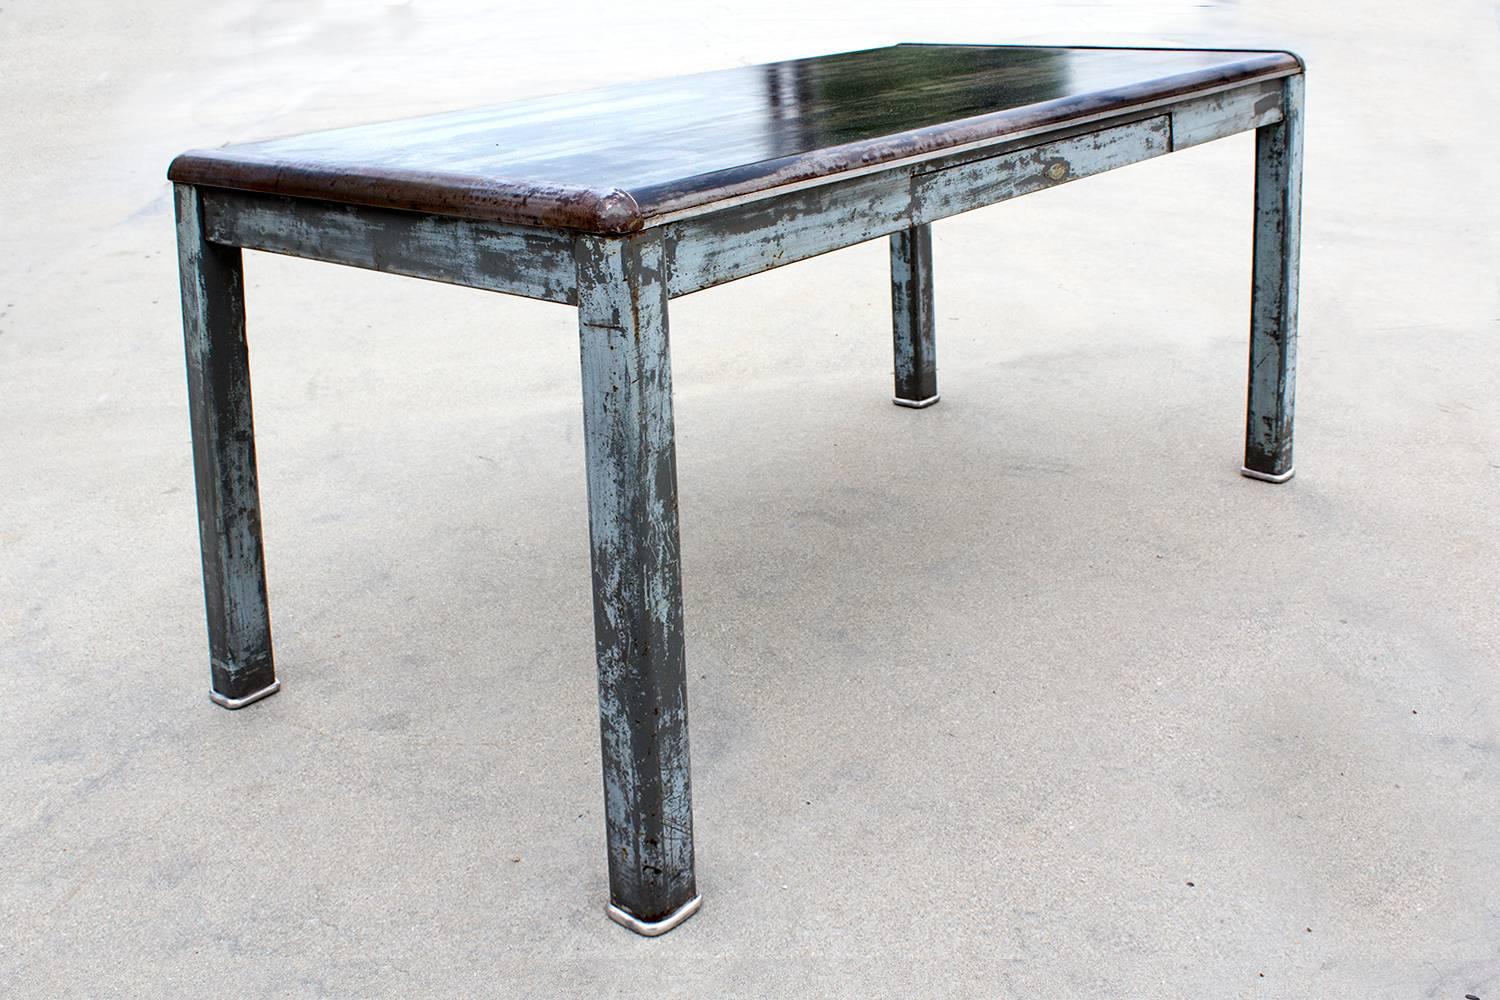 Fantastic art metal tanker table, circa 1940. We refinished this uncommon piece with a distressed patina finish. Tabletop includes unique rounded steel end-caps and utility drawer. 

Dimensions: 60